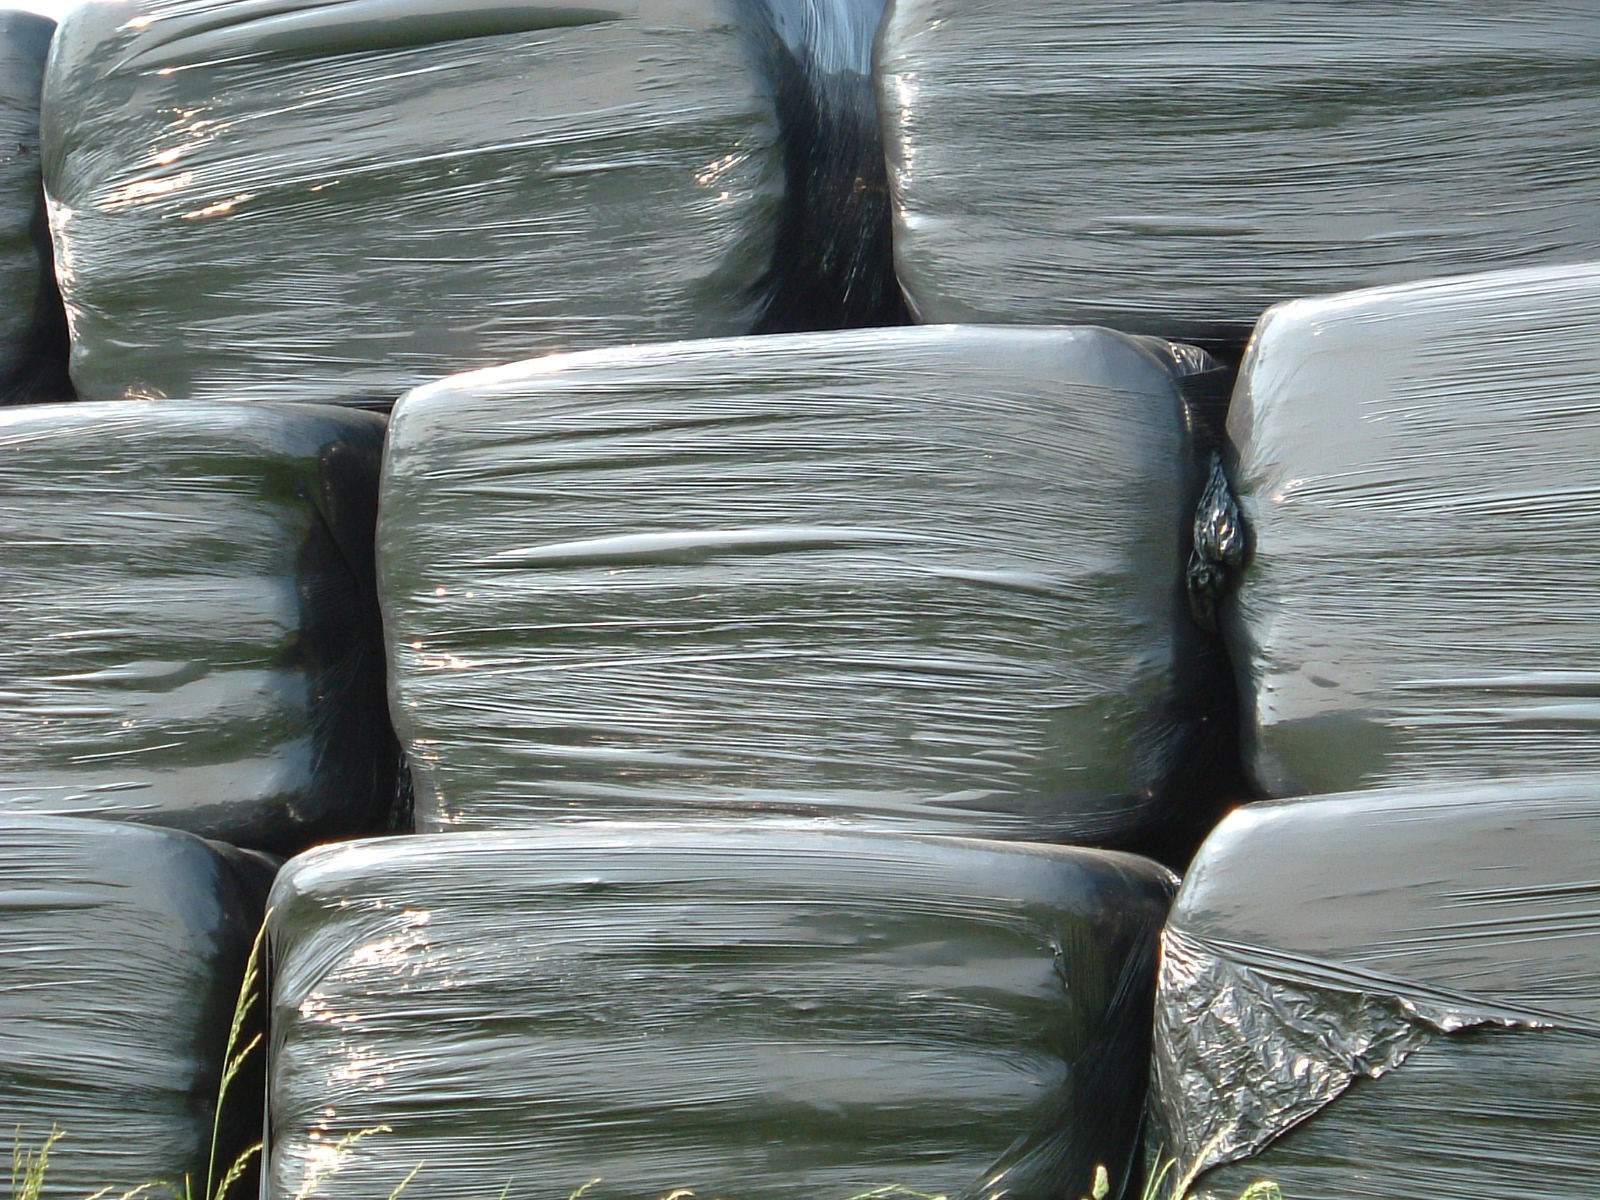 Silage bags stacked in a field